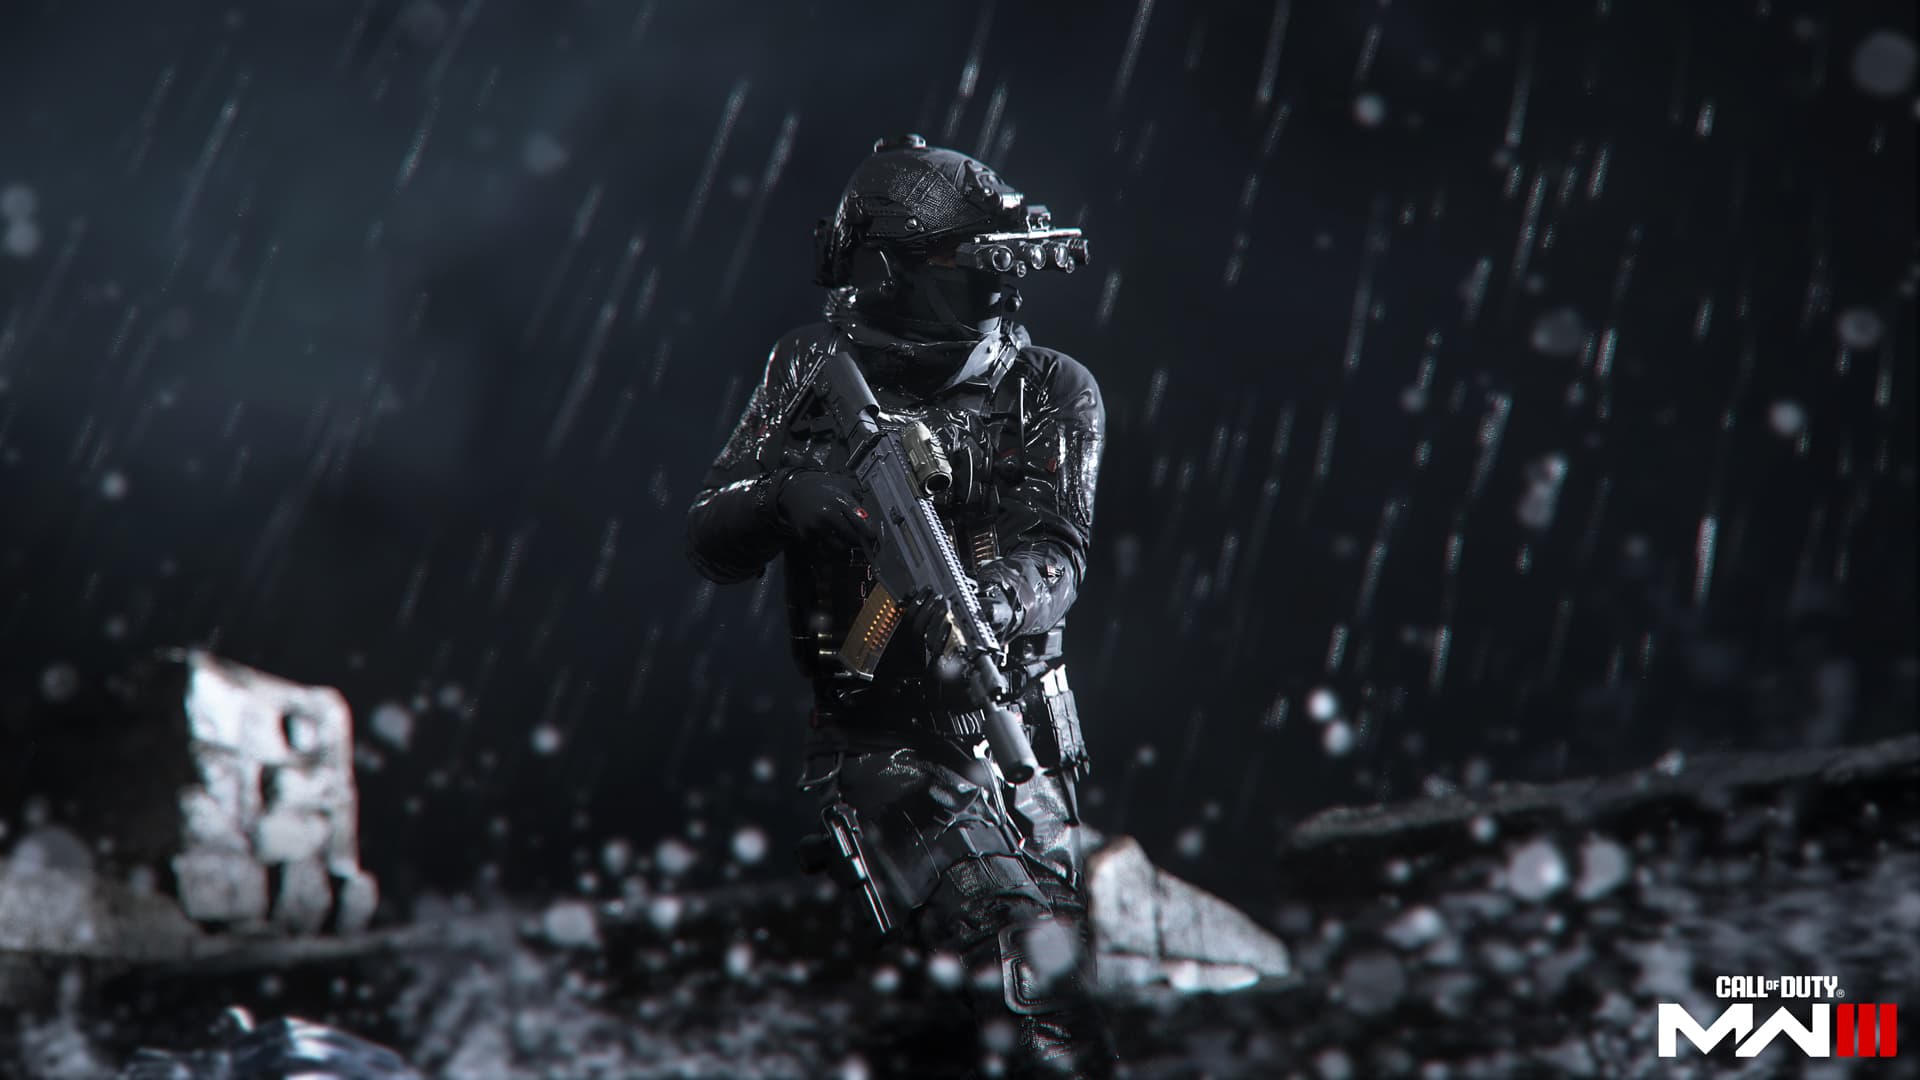 100+] 4k Call Of Duty Wallpapers